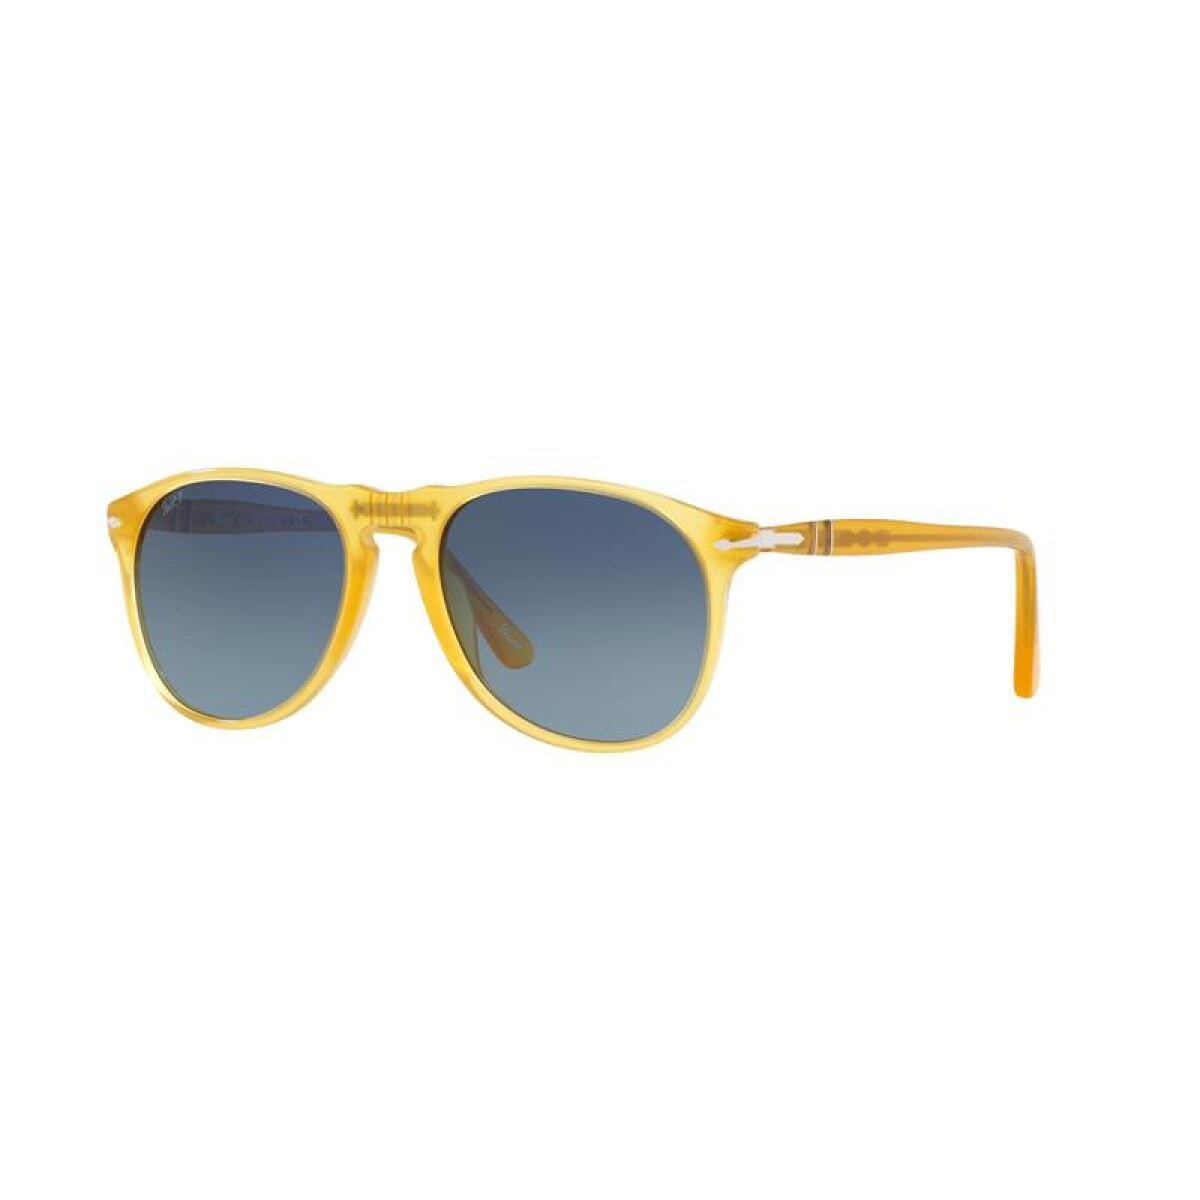 Persol 9649-s - 204/s3 